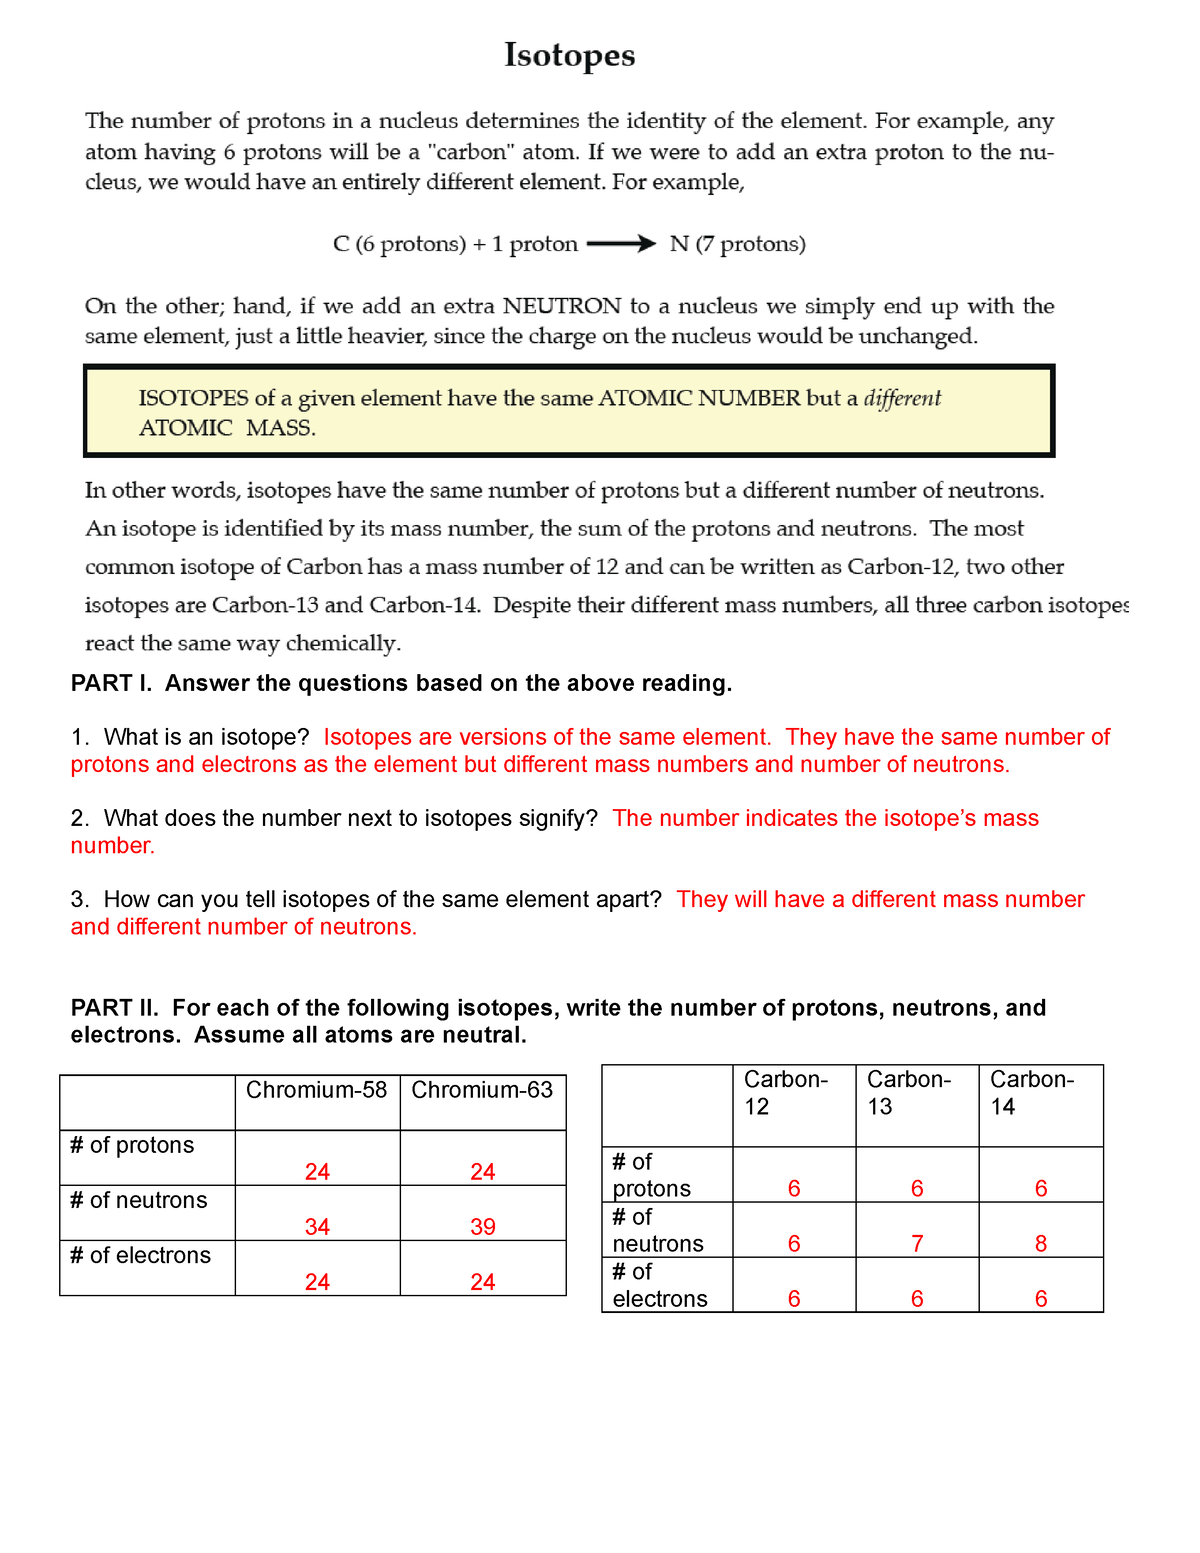 isotopes-worksheet-answer-key-part-i-answer-the-questions-based-on